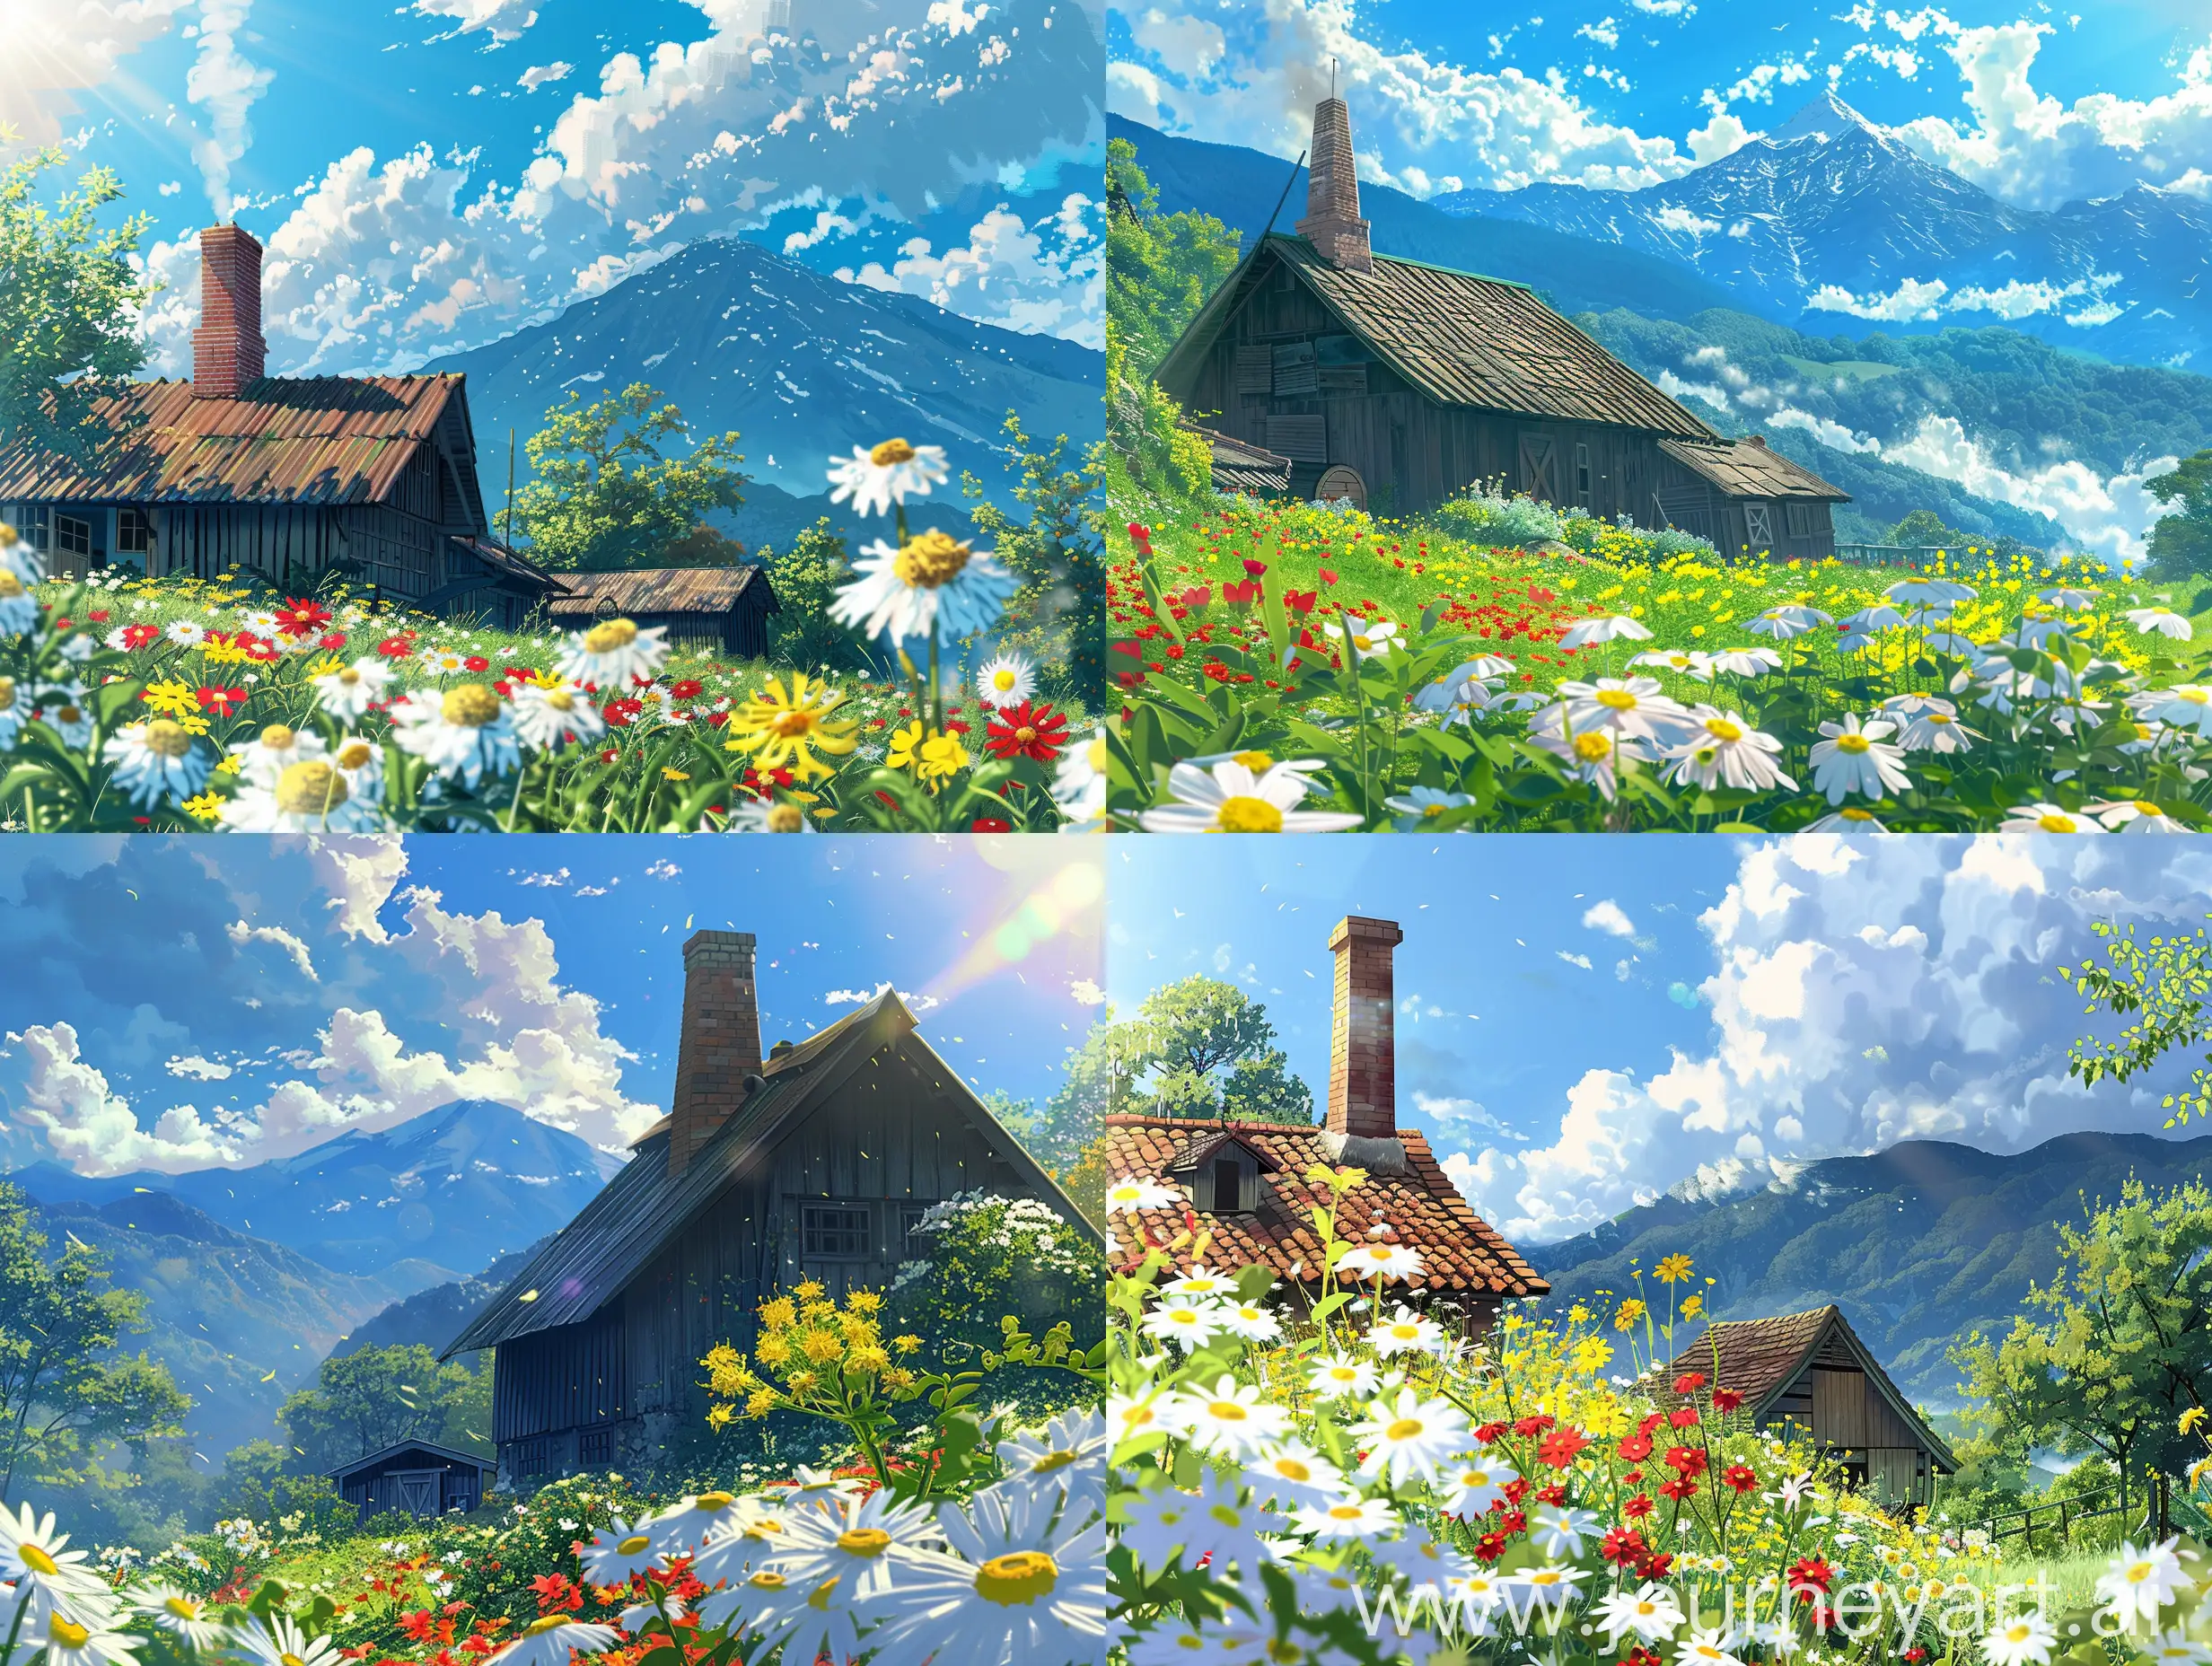 Charming-Indonesian-Cottage-with-Spring-Flowers-in-Makoto-Shinkai-Style